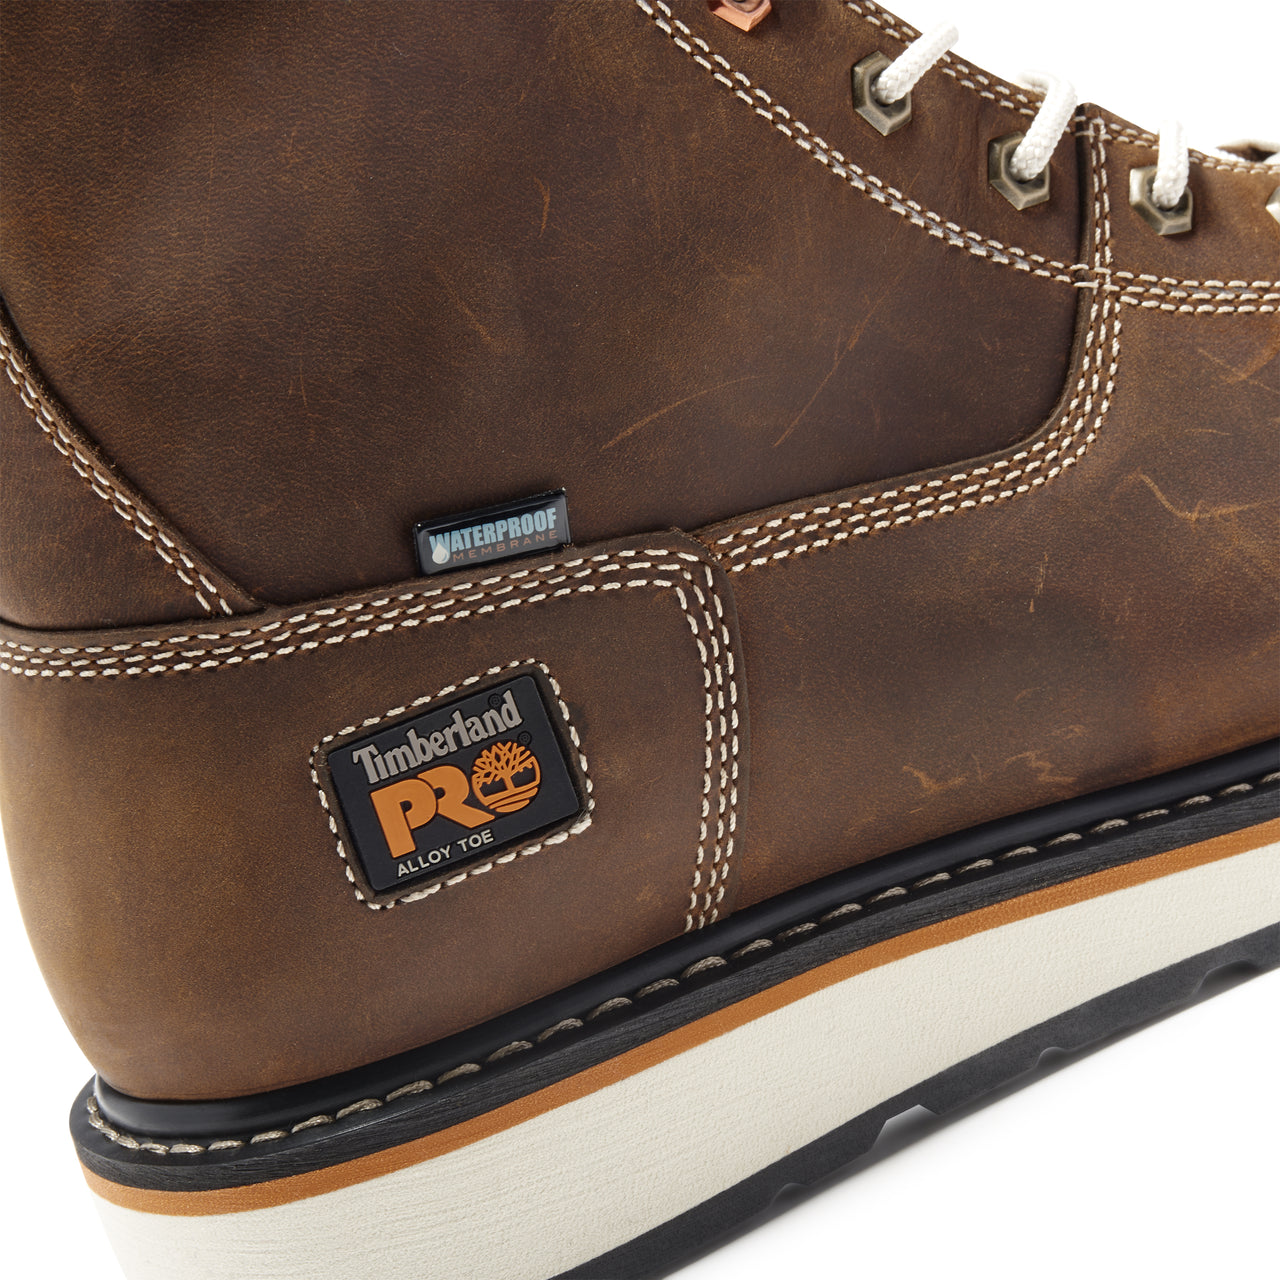 Timberland Pro Gridworks 8" Alloy Safety Toe Brown Full-Grain Leather TB0A12EZ